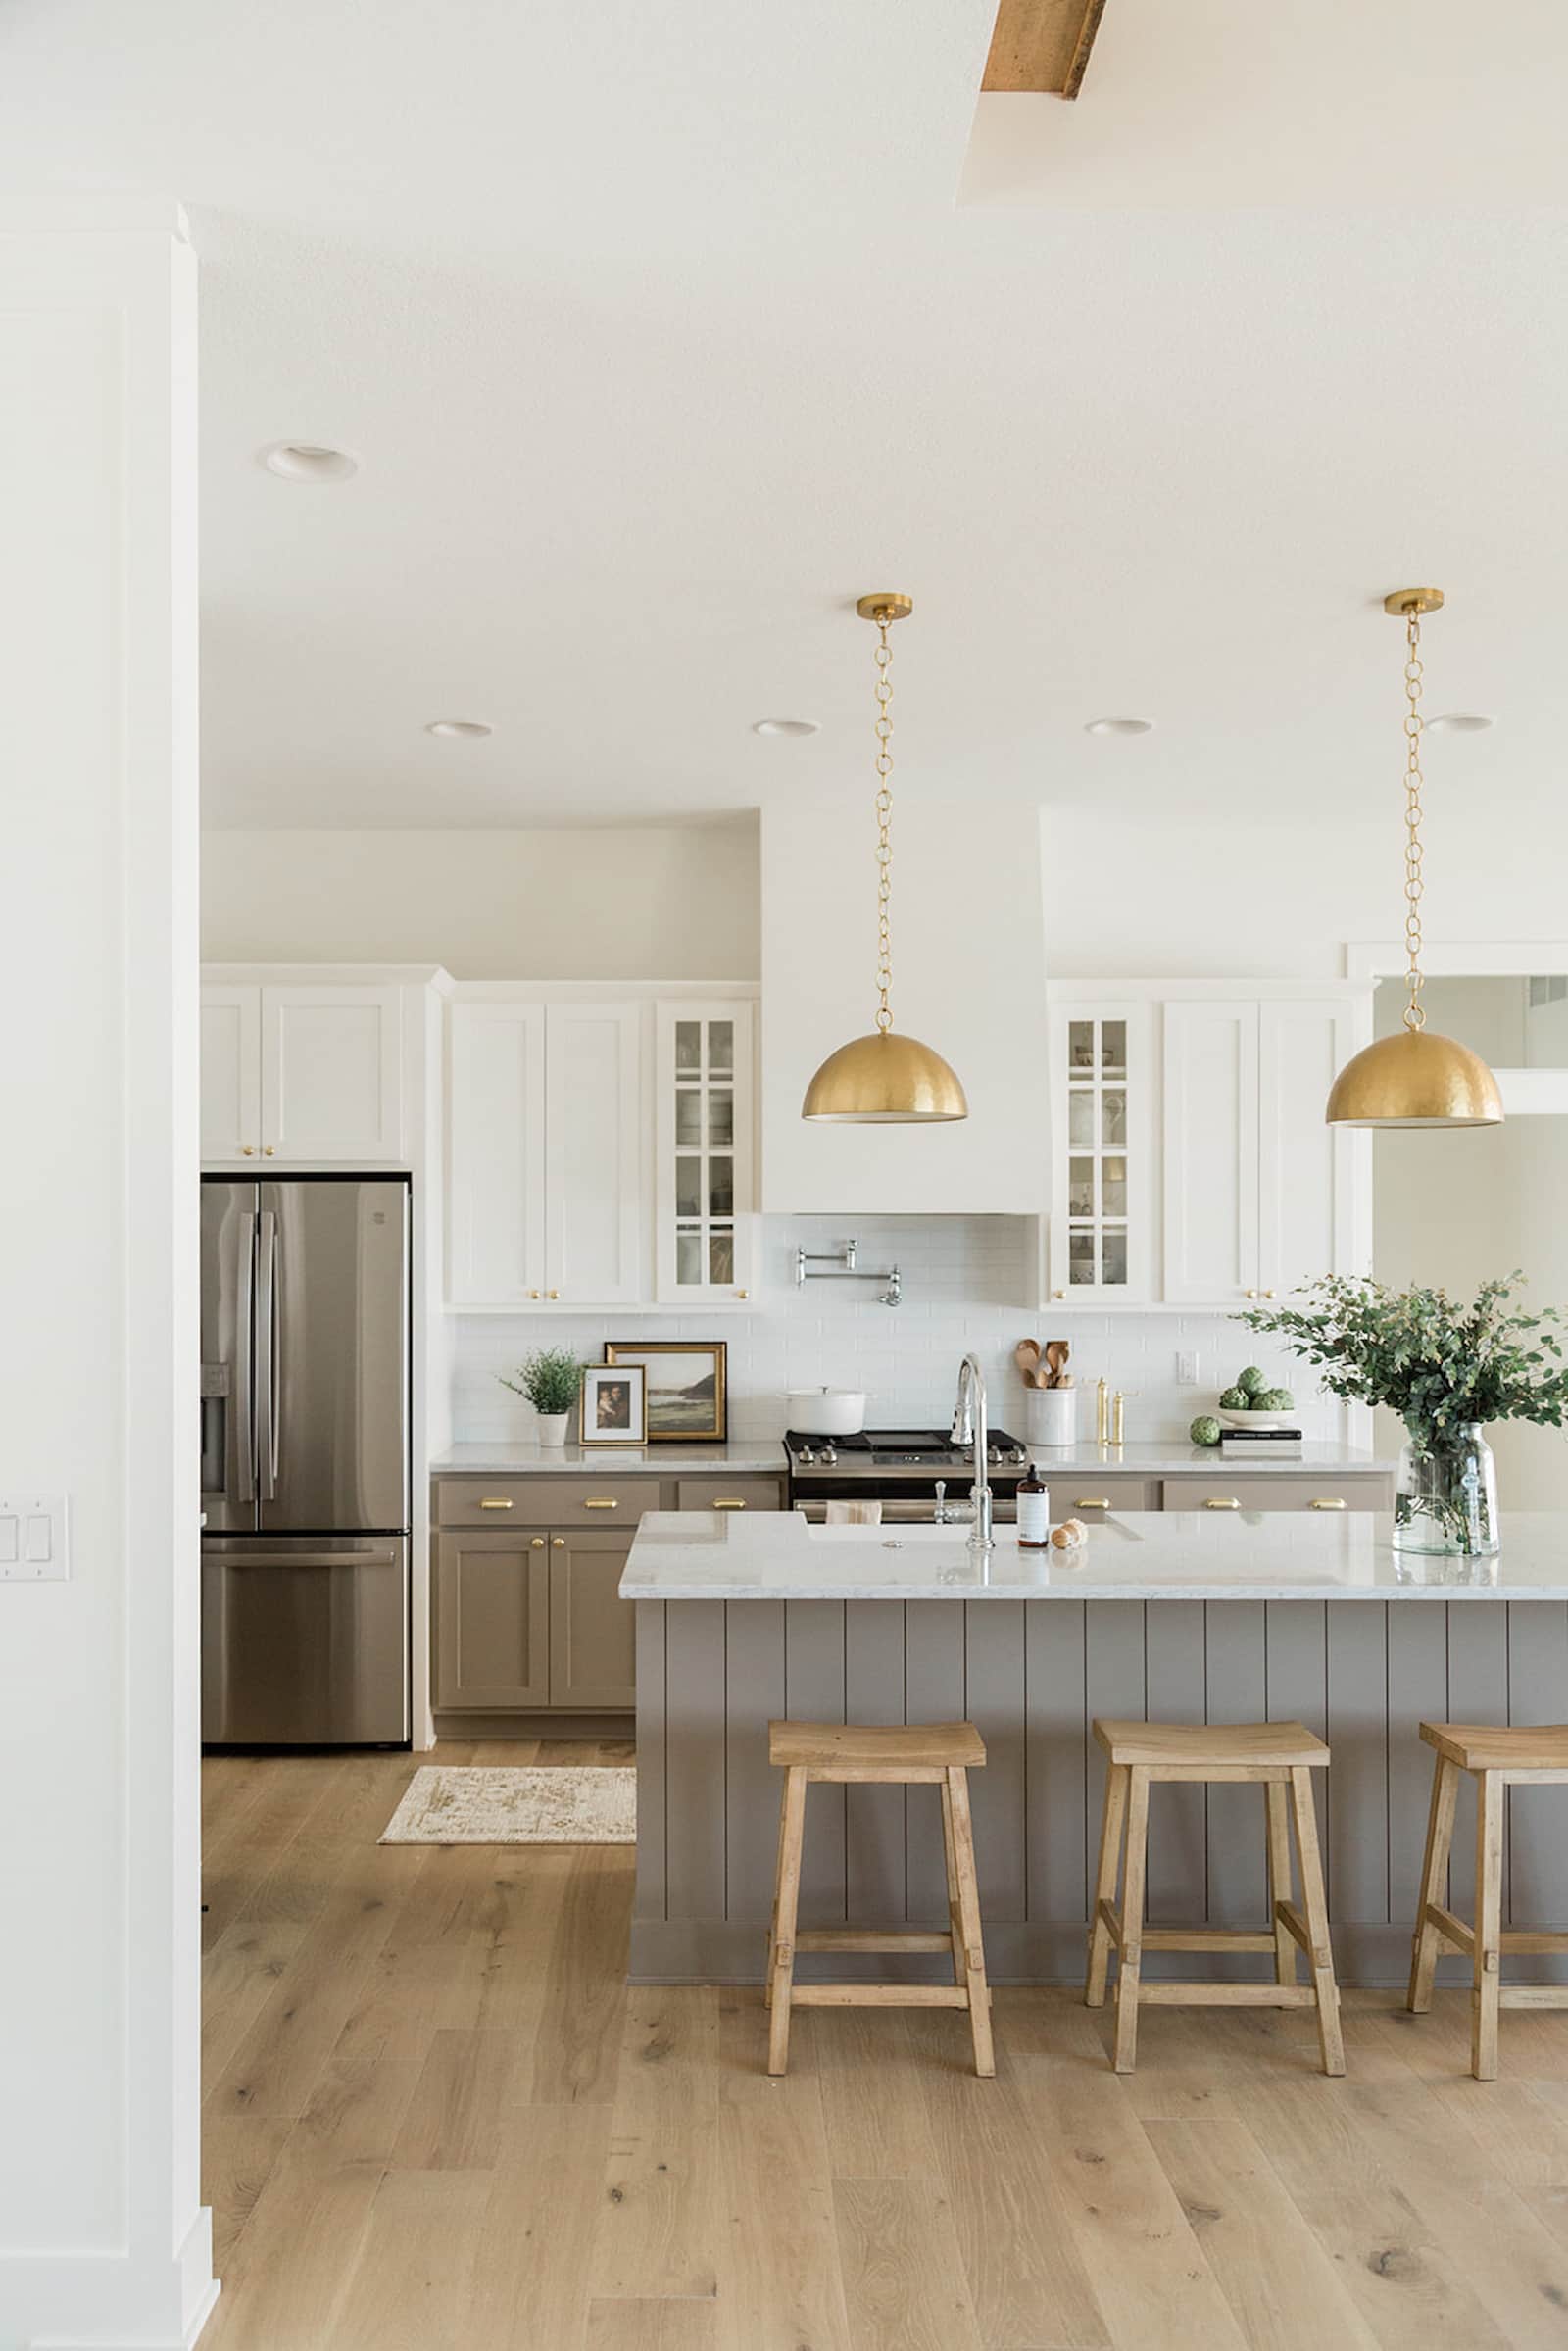 beige kitchen cabinets with white countertops and gold pendant lights